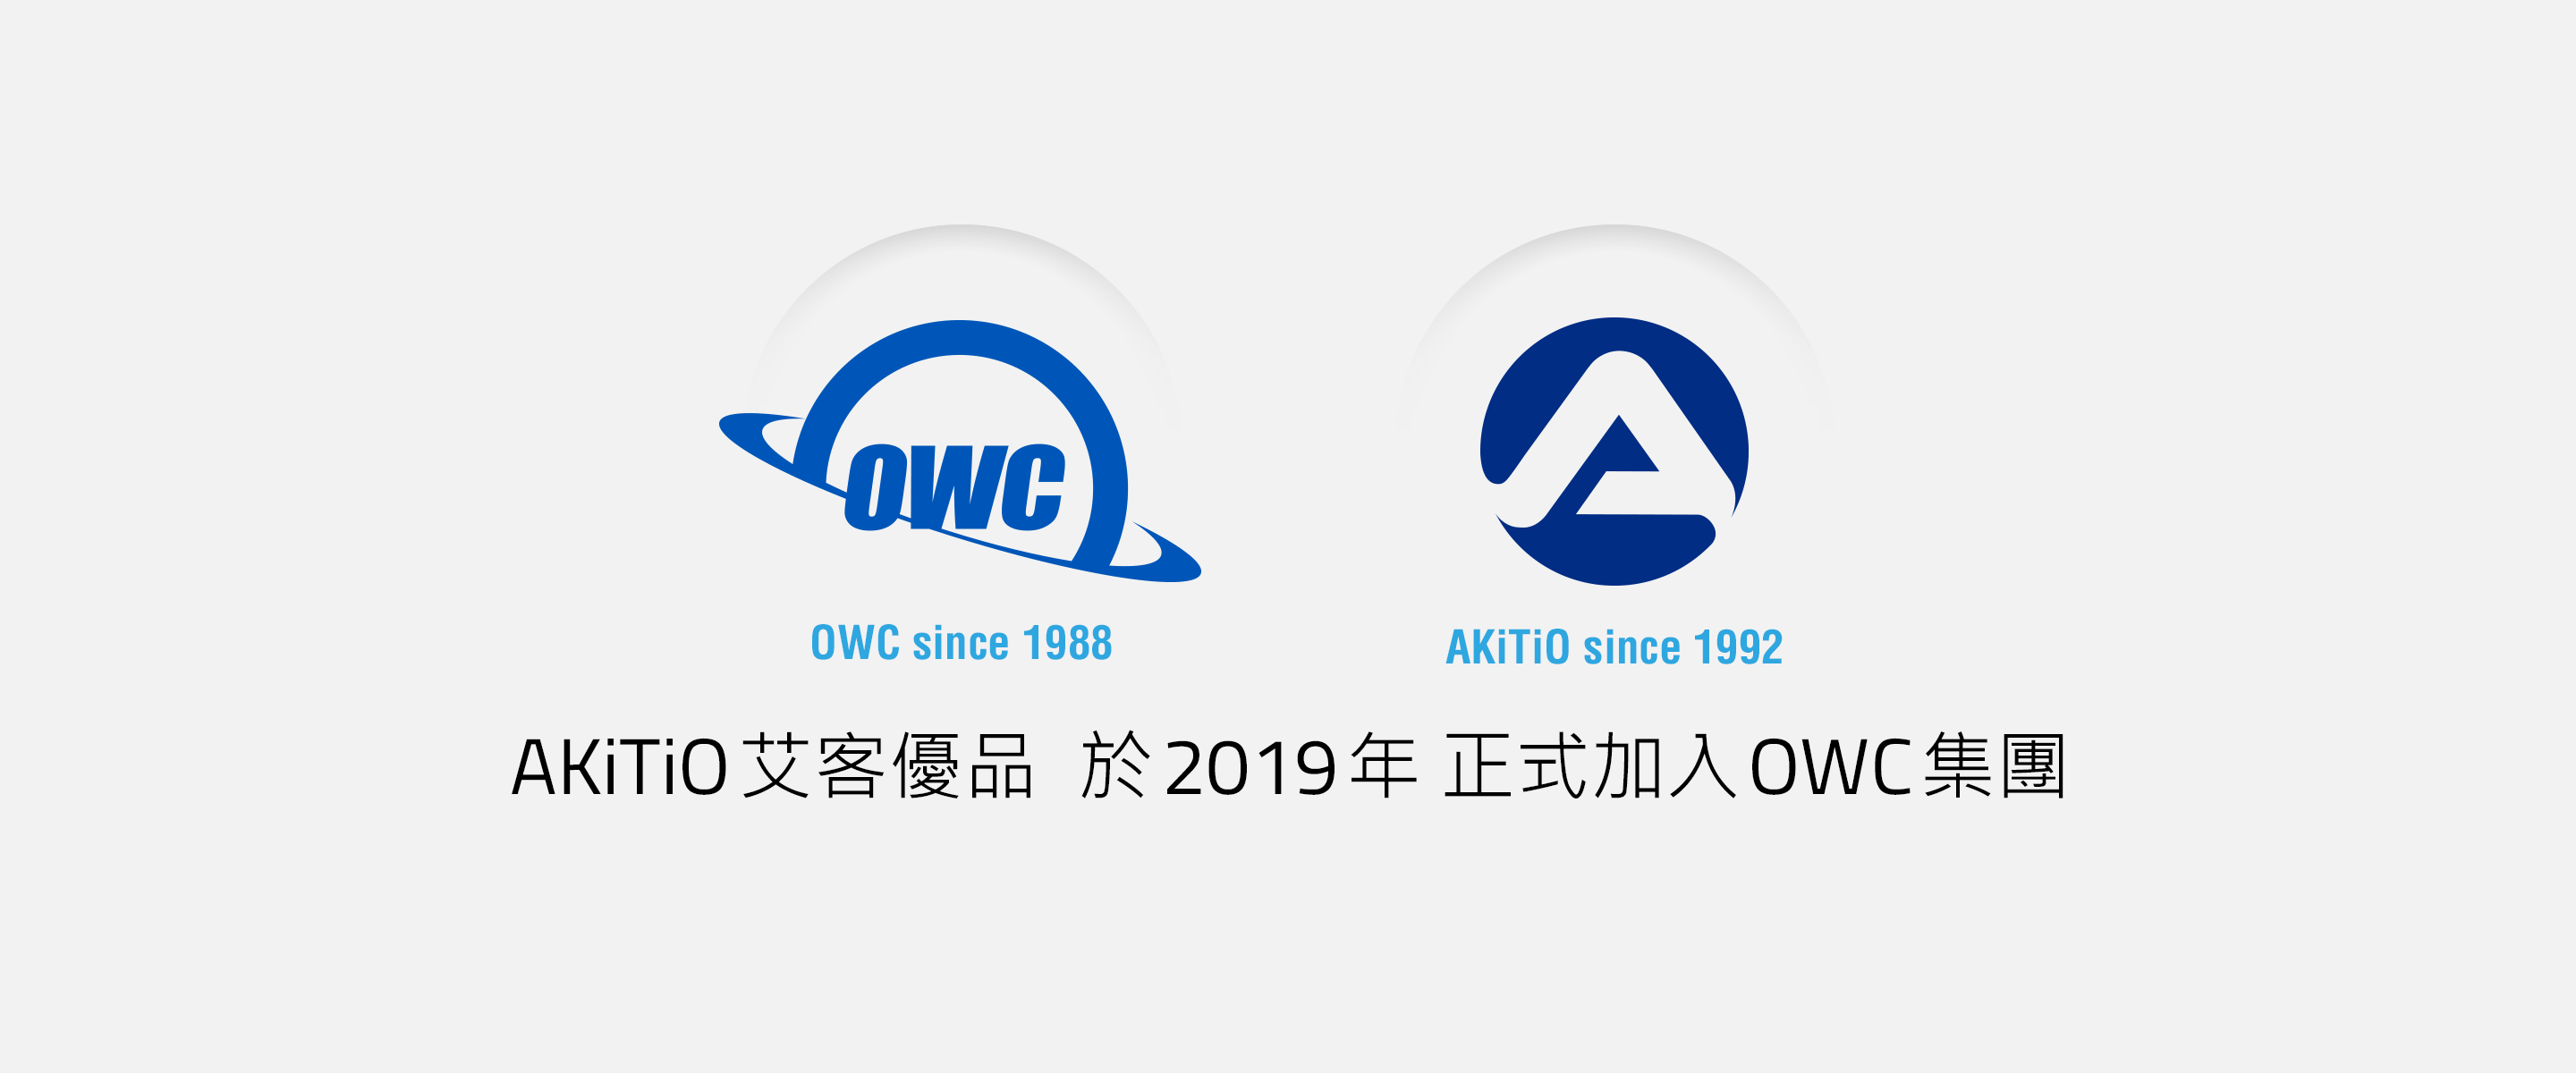 AKiTiO joins OWC